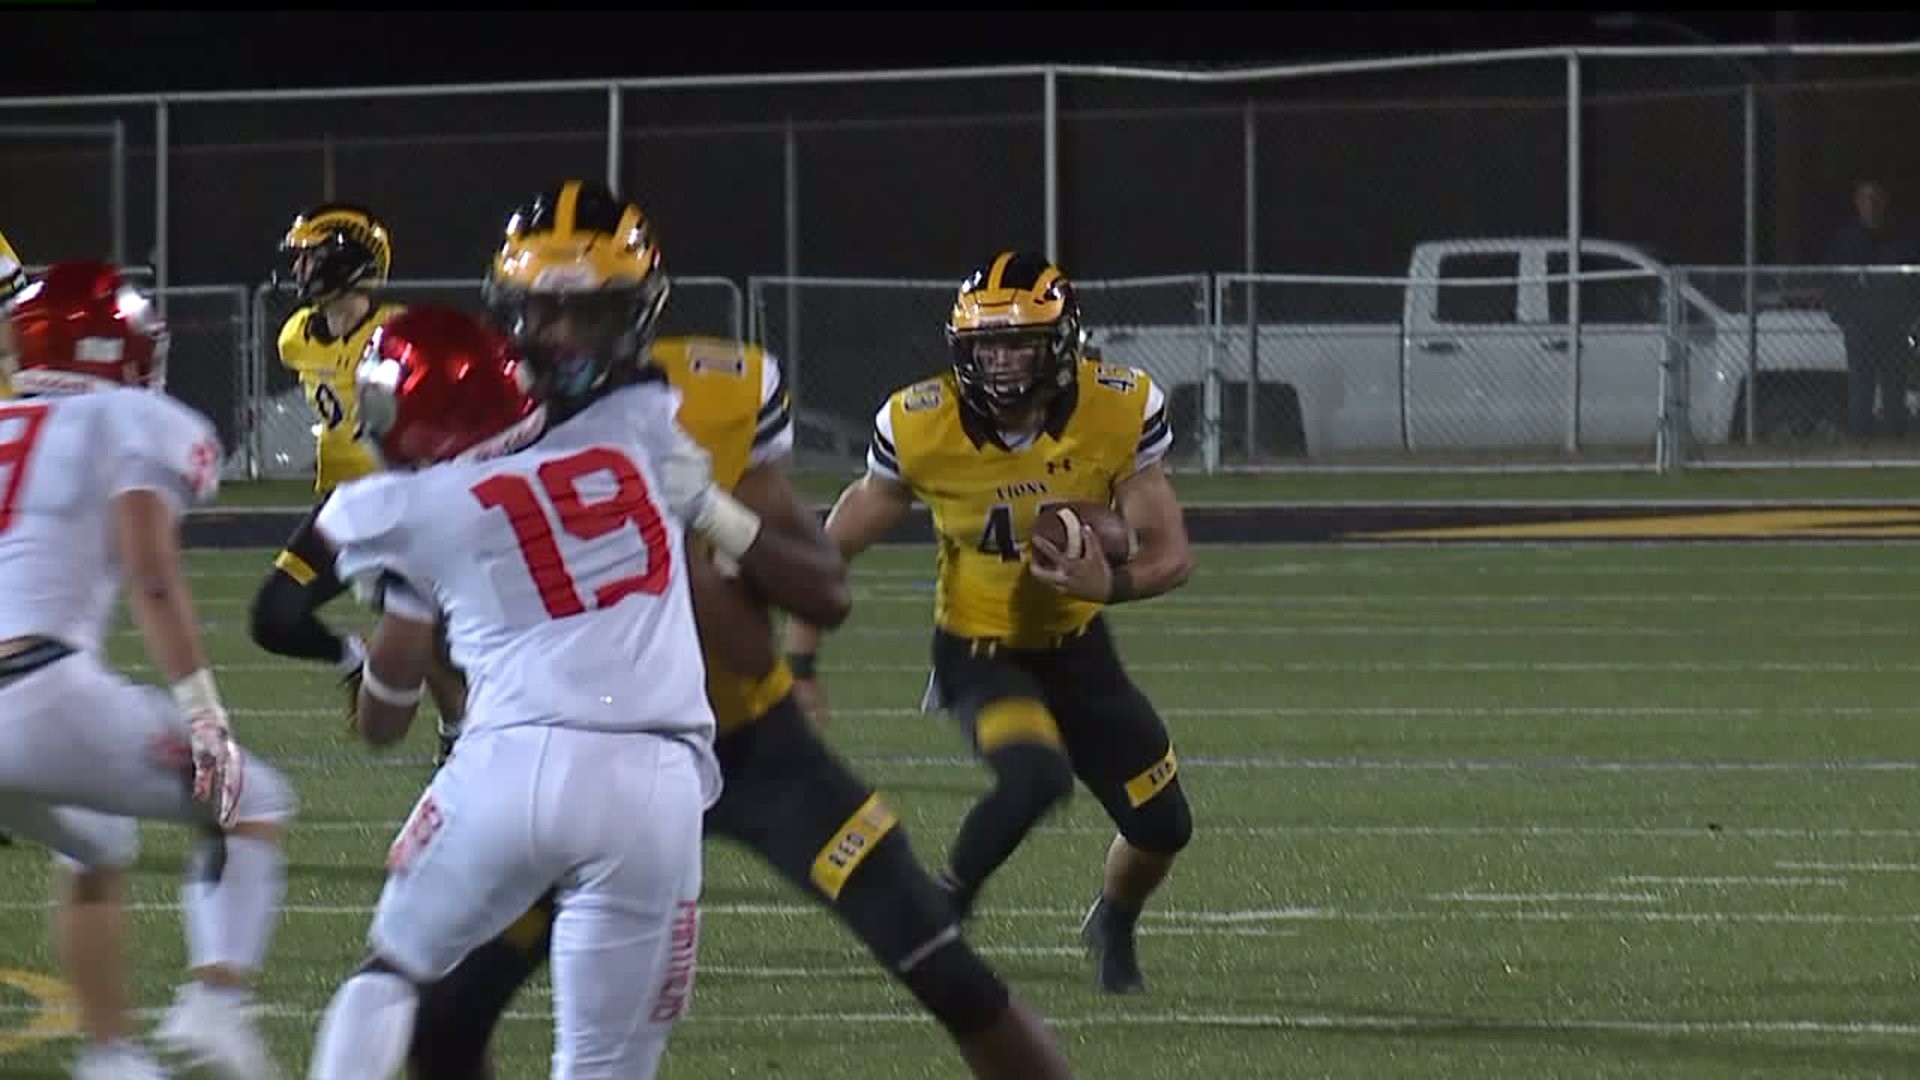 HSFF 2019 week 4 Central York at Red Lion highlights